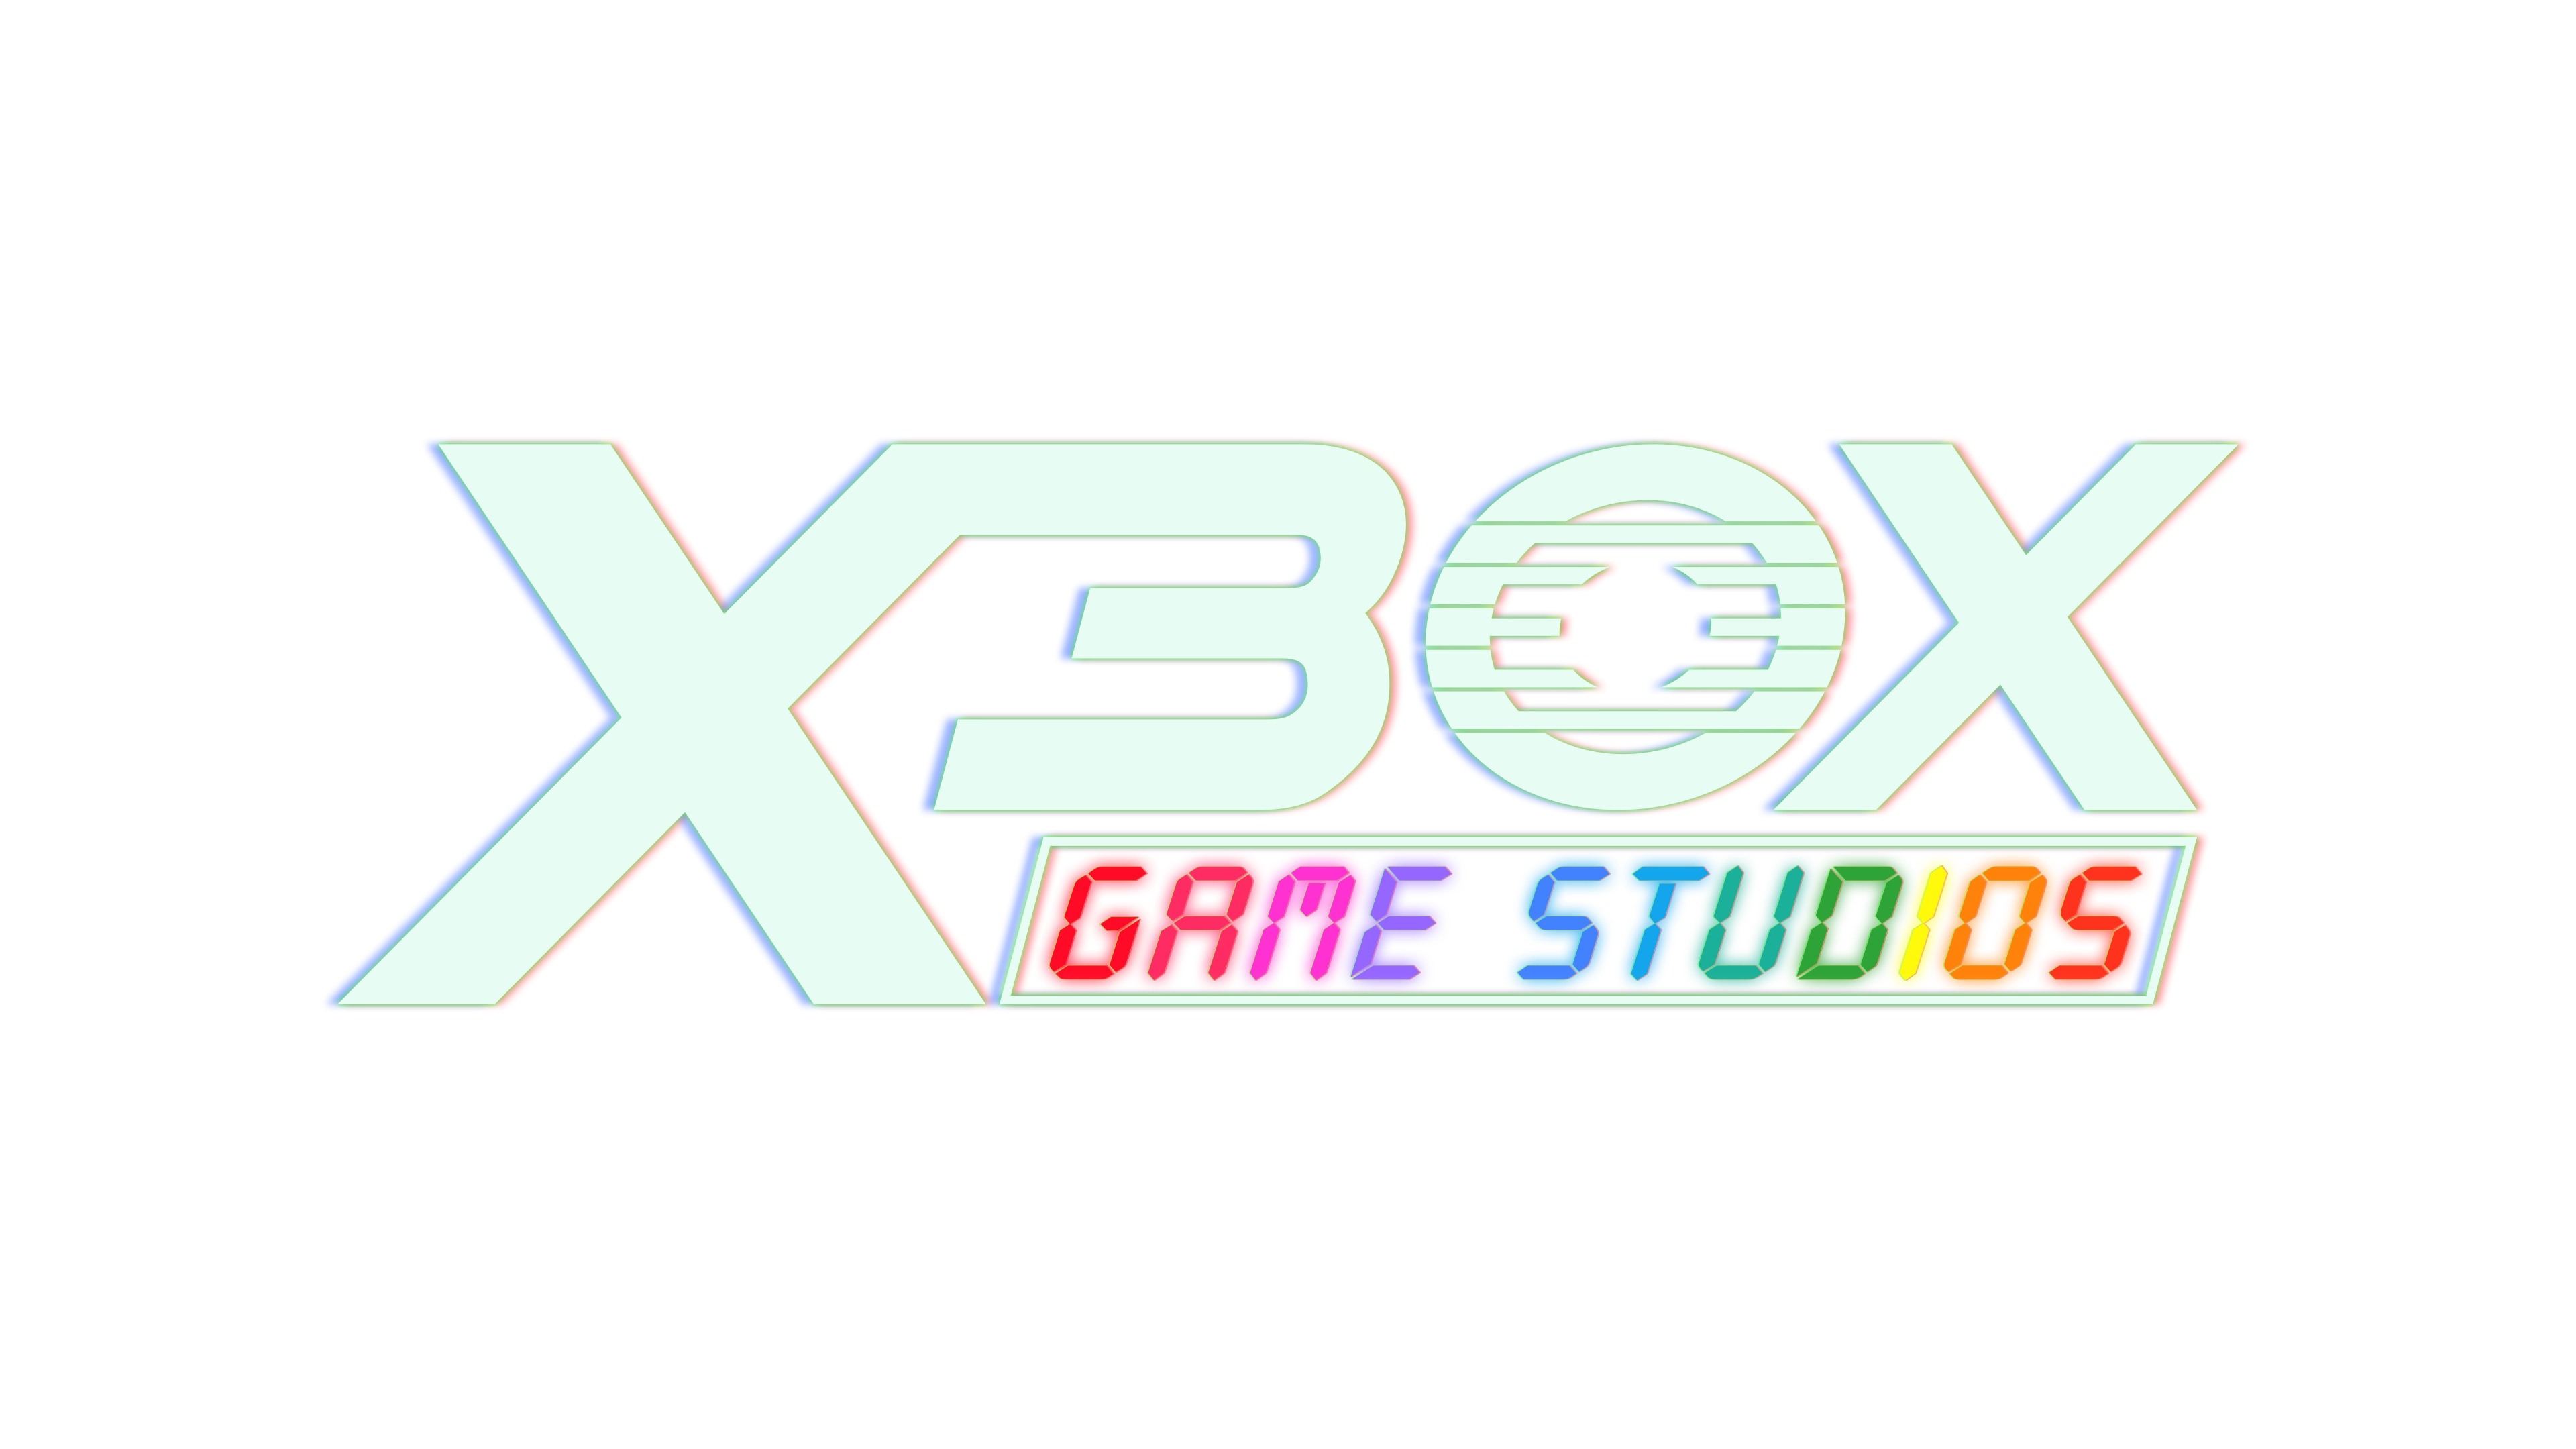 Xbox Game Studios style 1990s Grounded by Playbox36 on DeviantArt